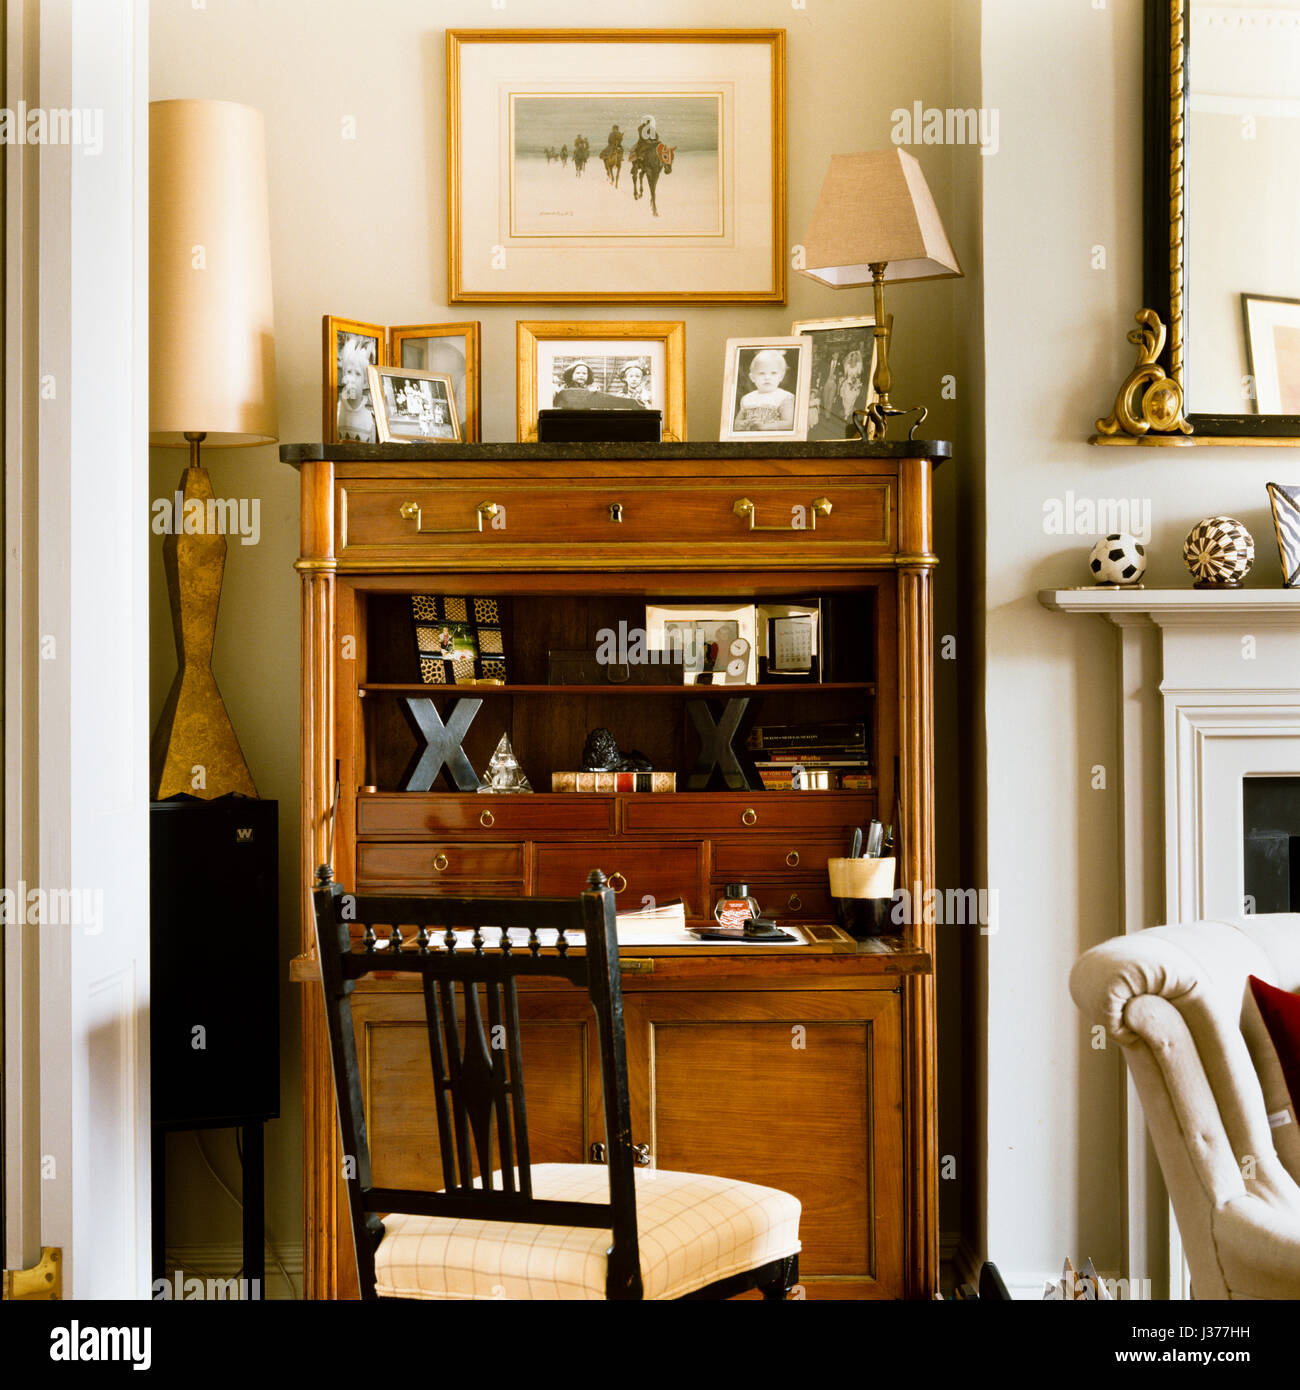 Display cabinet in living room. Stock Photo